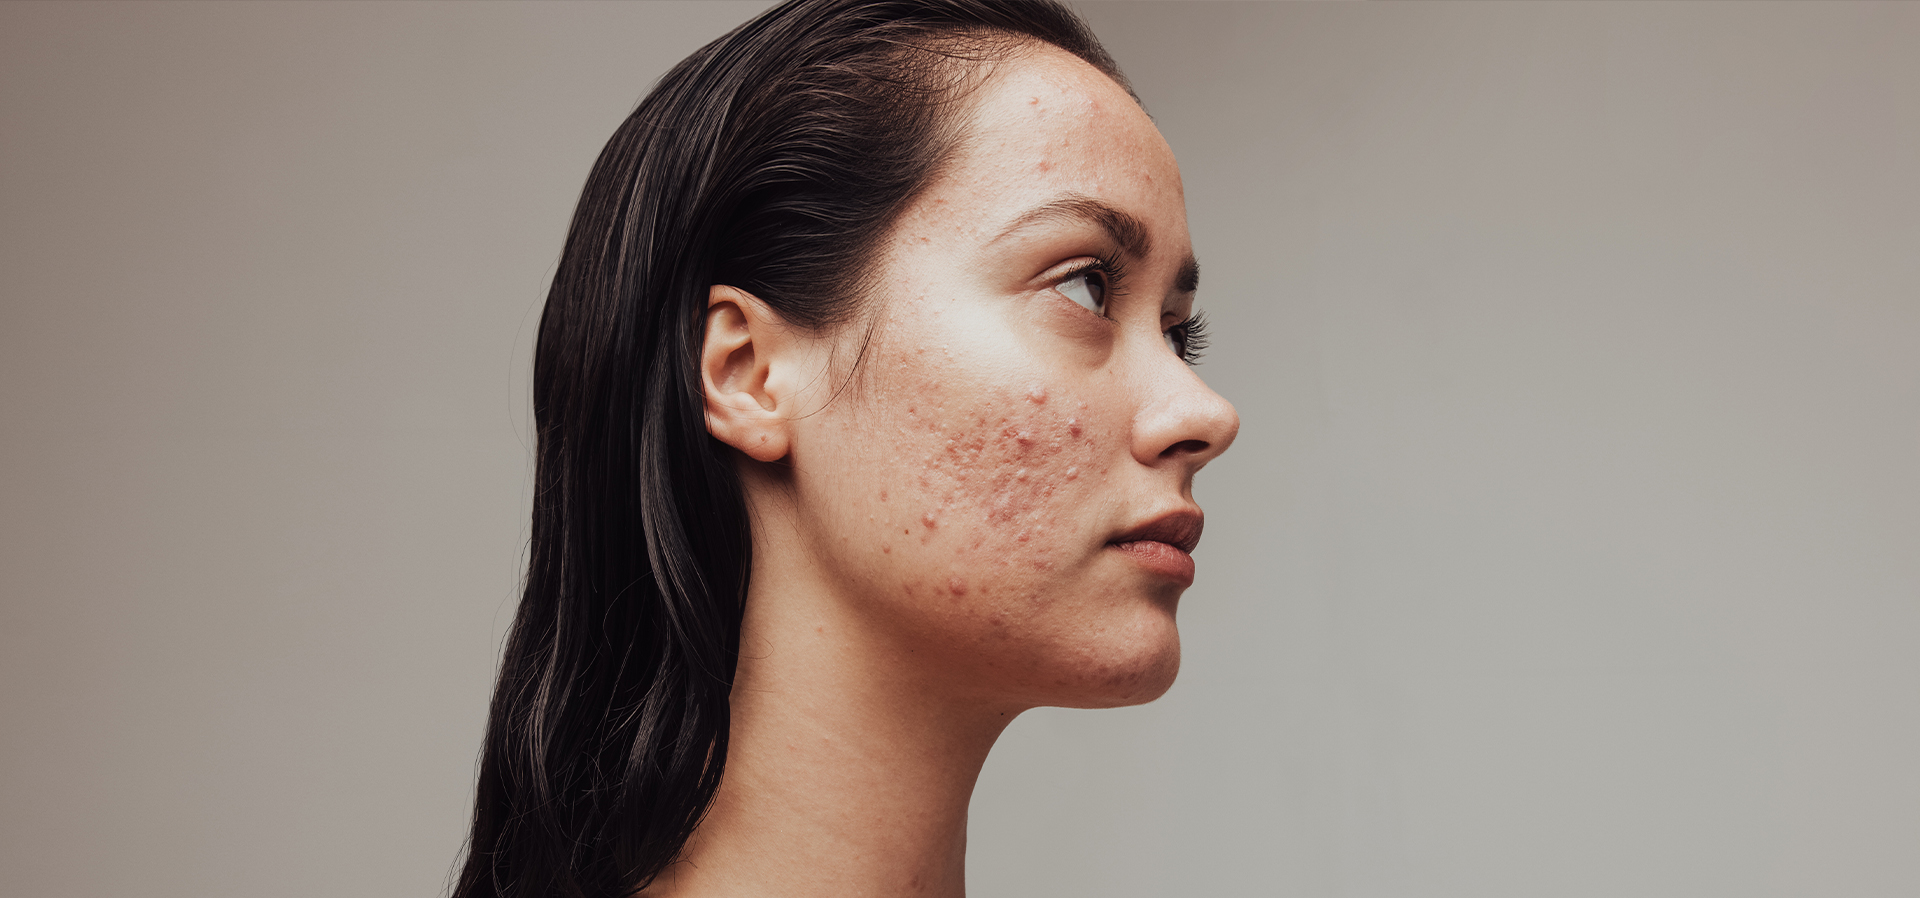 Acne + Acne Scarring